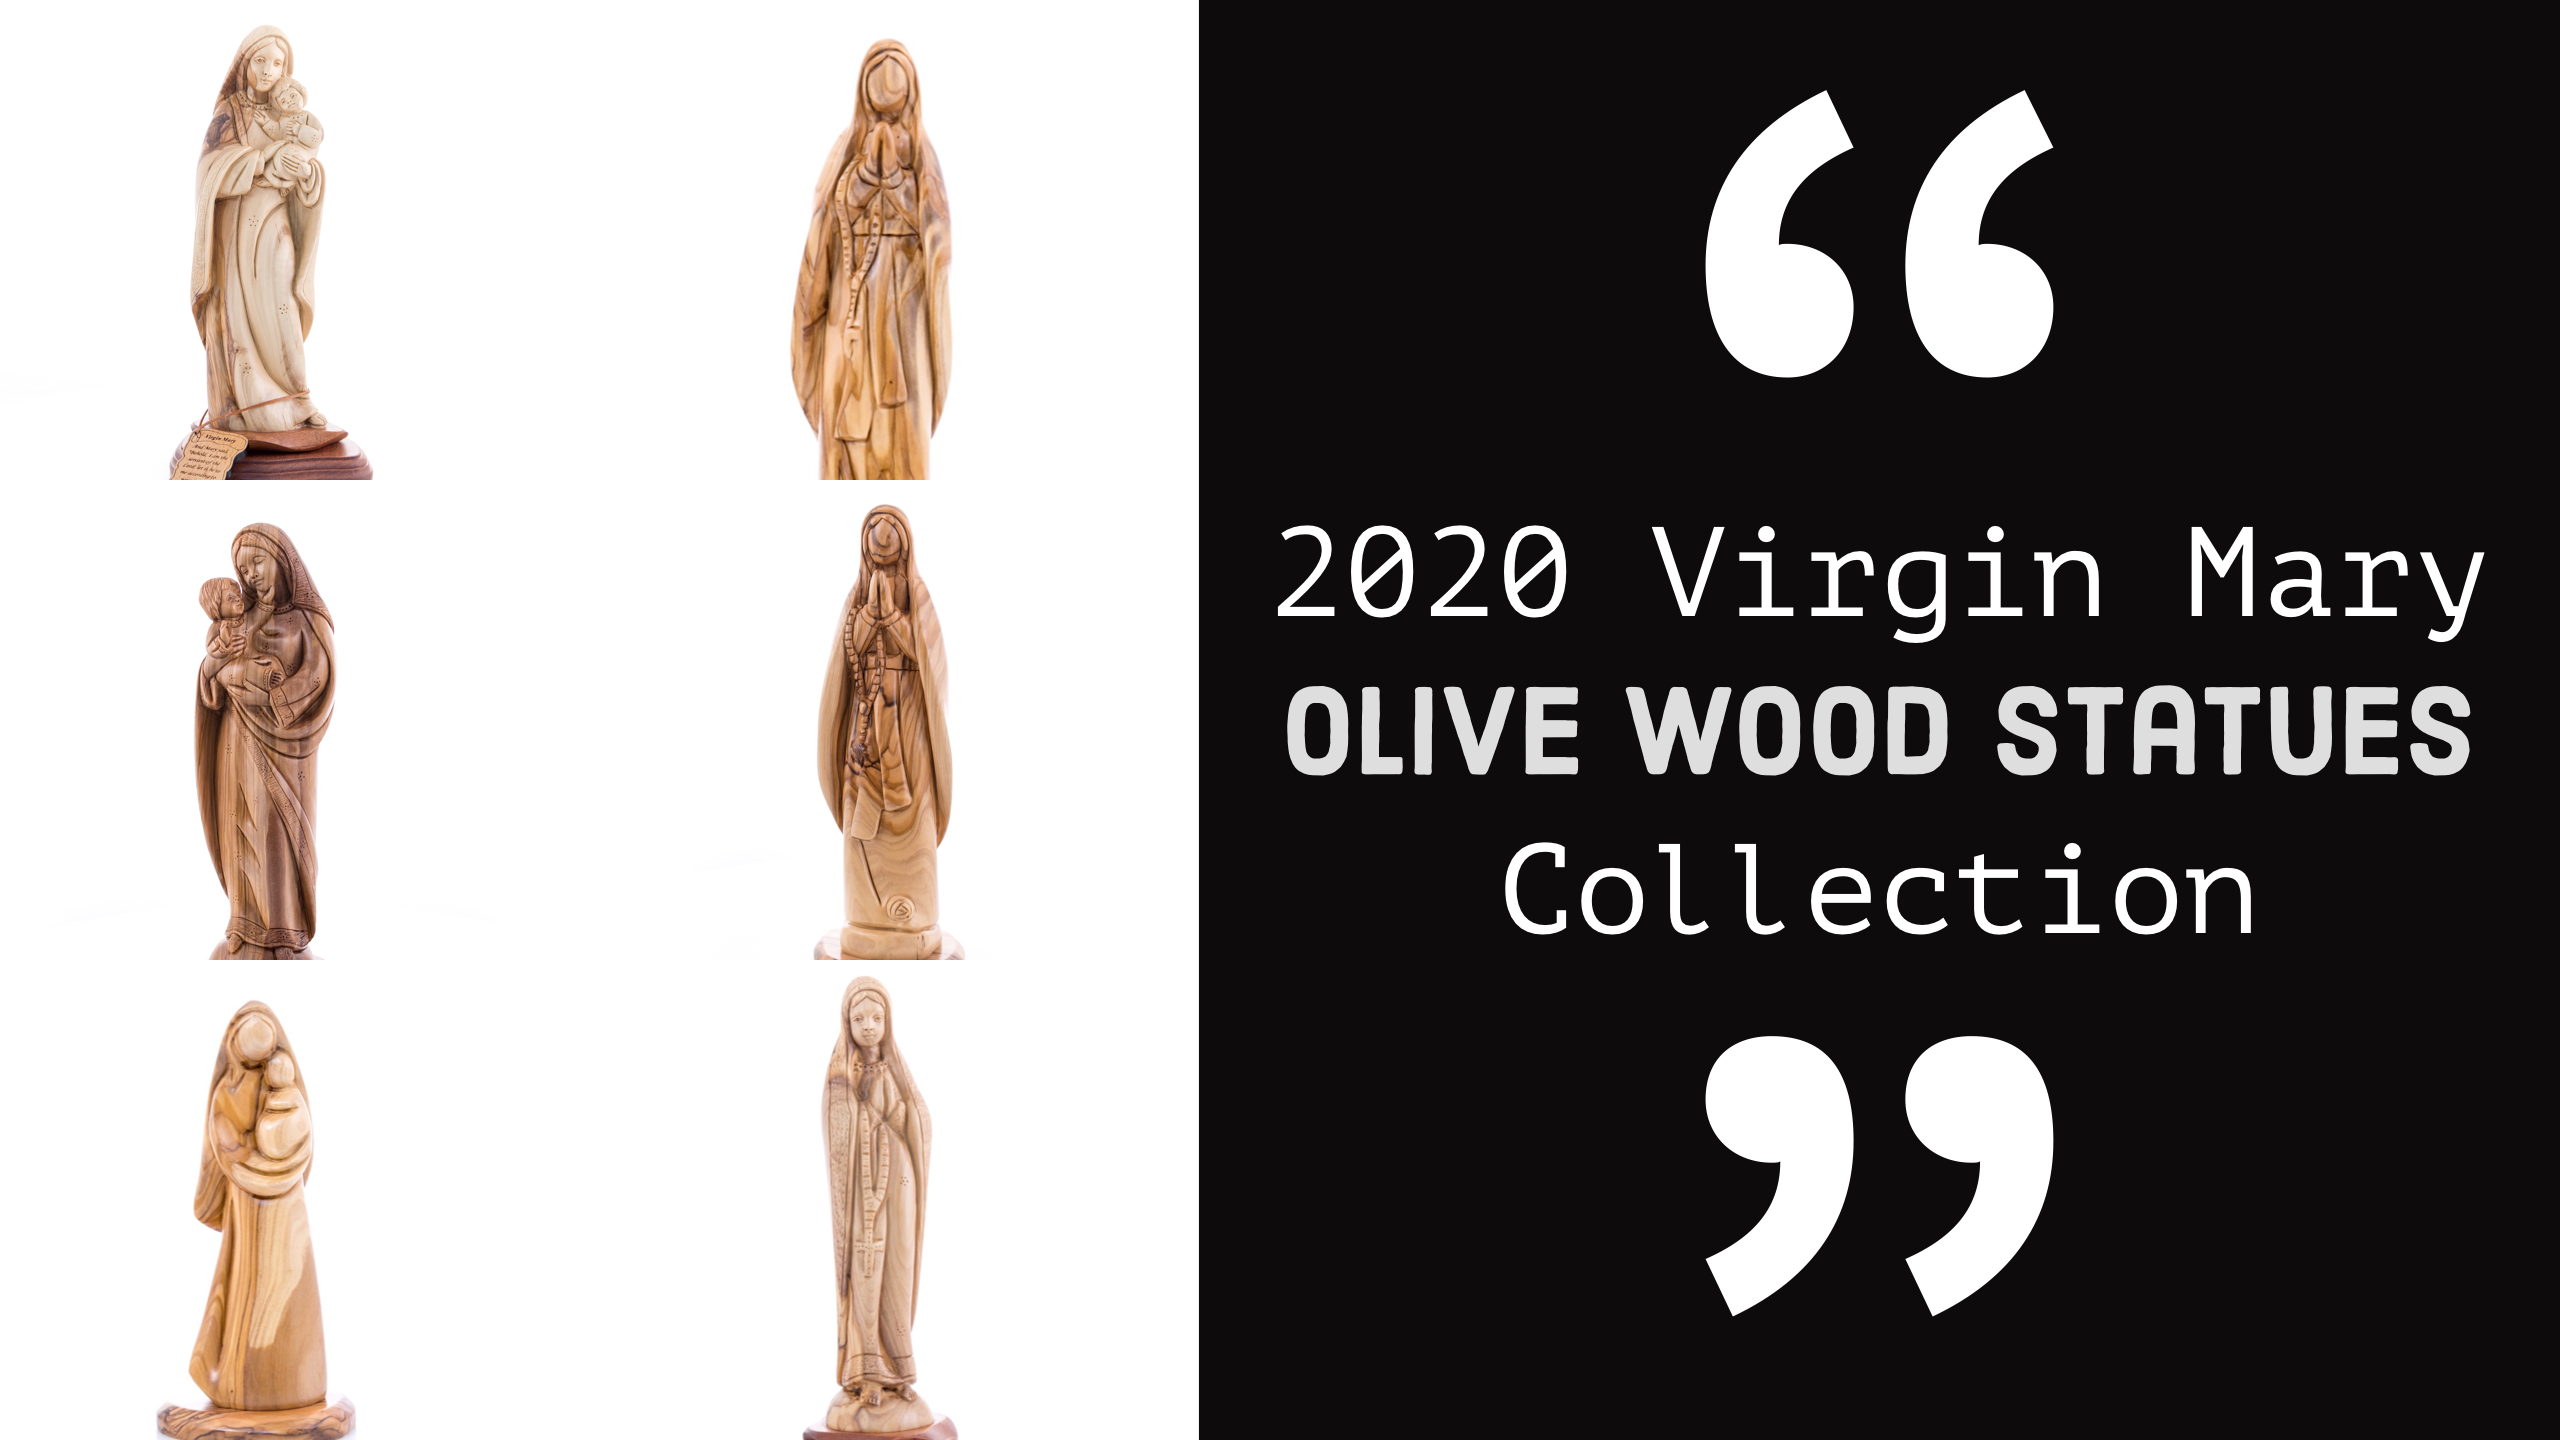 2020 Virgin Mary Olive Wood Statues Collection